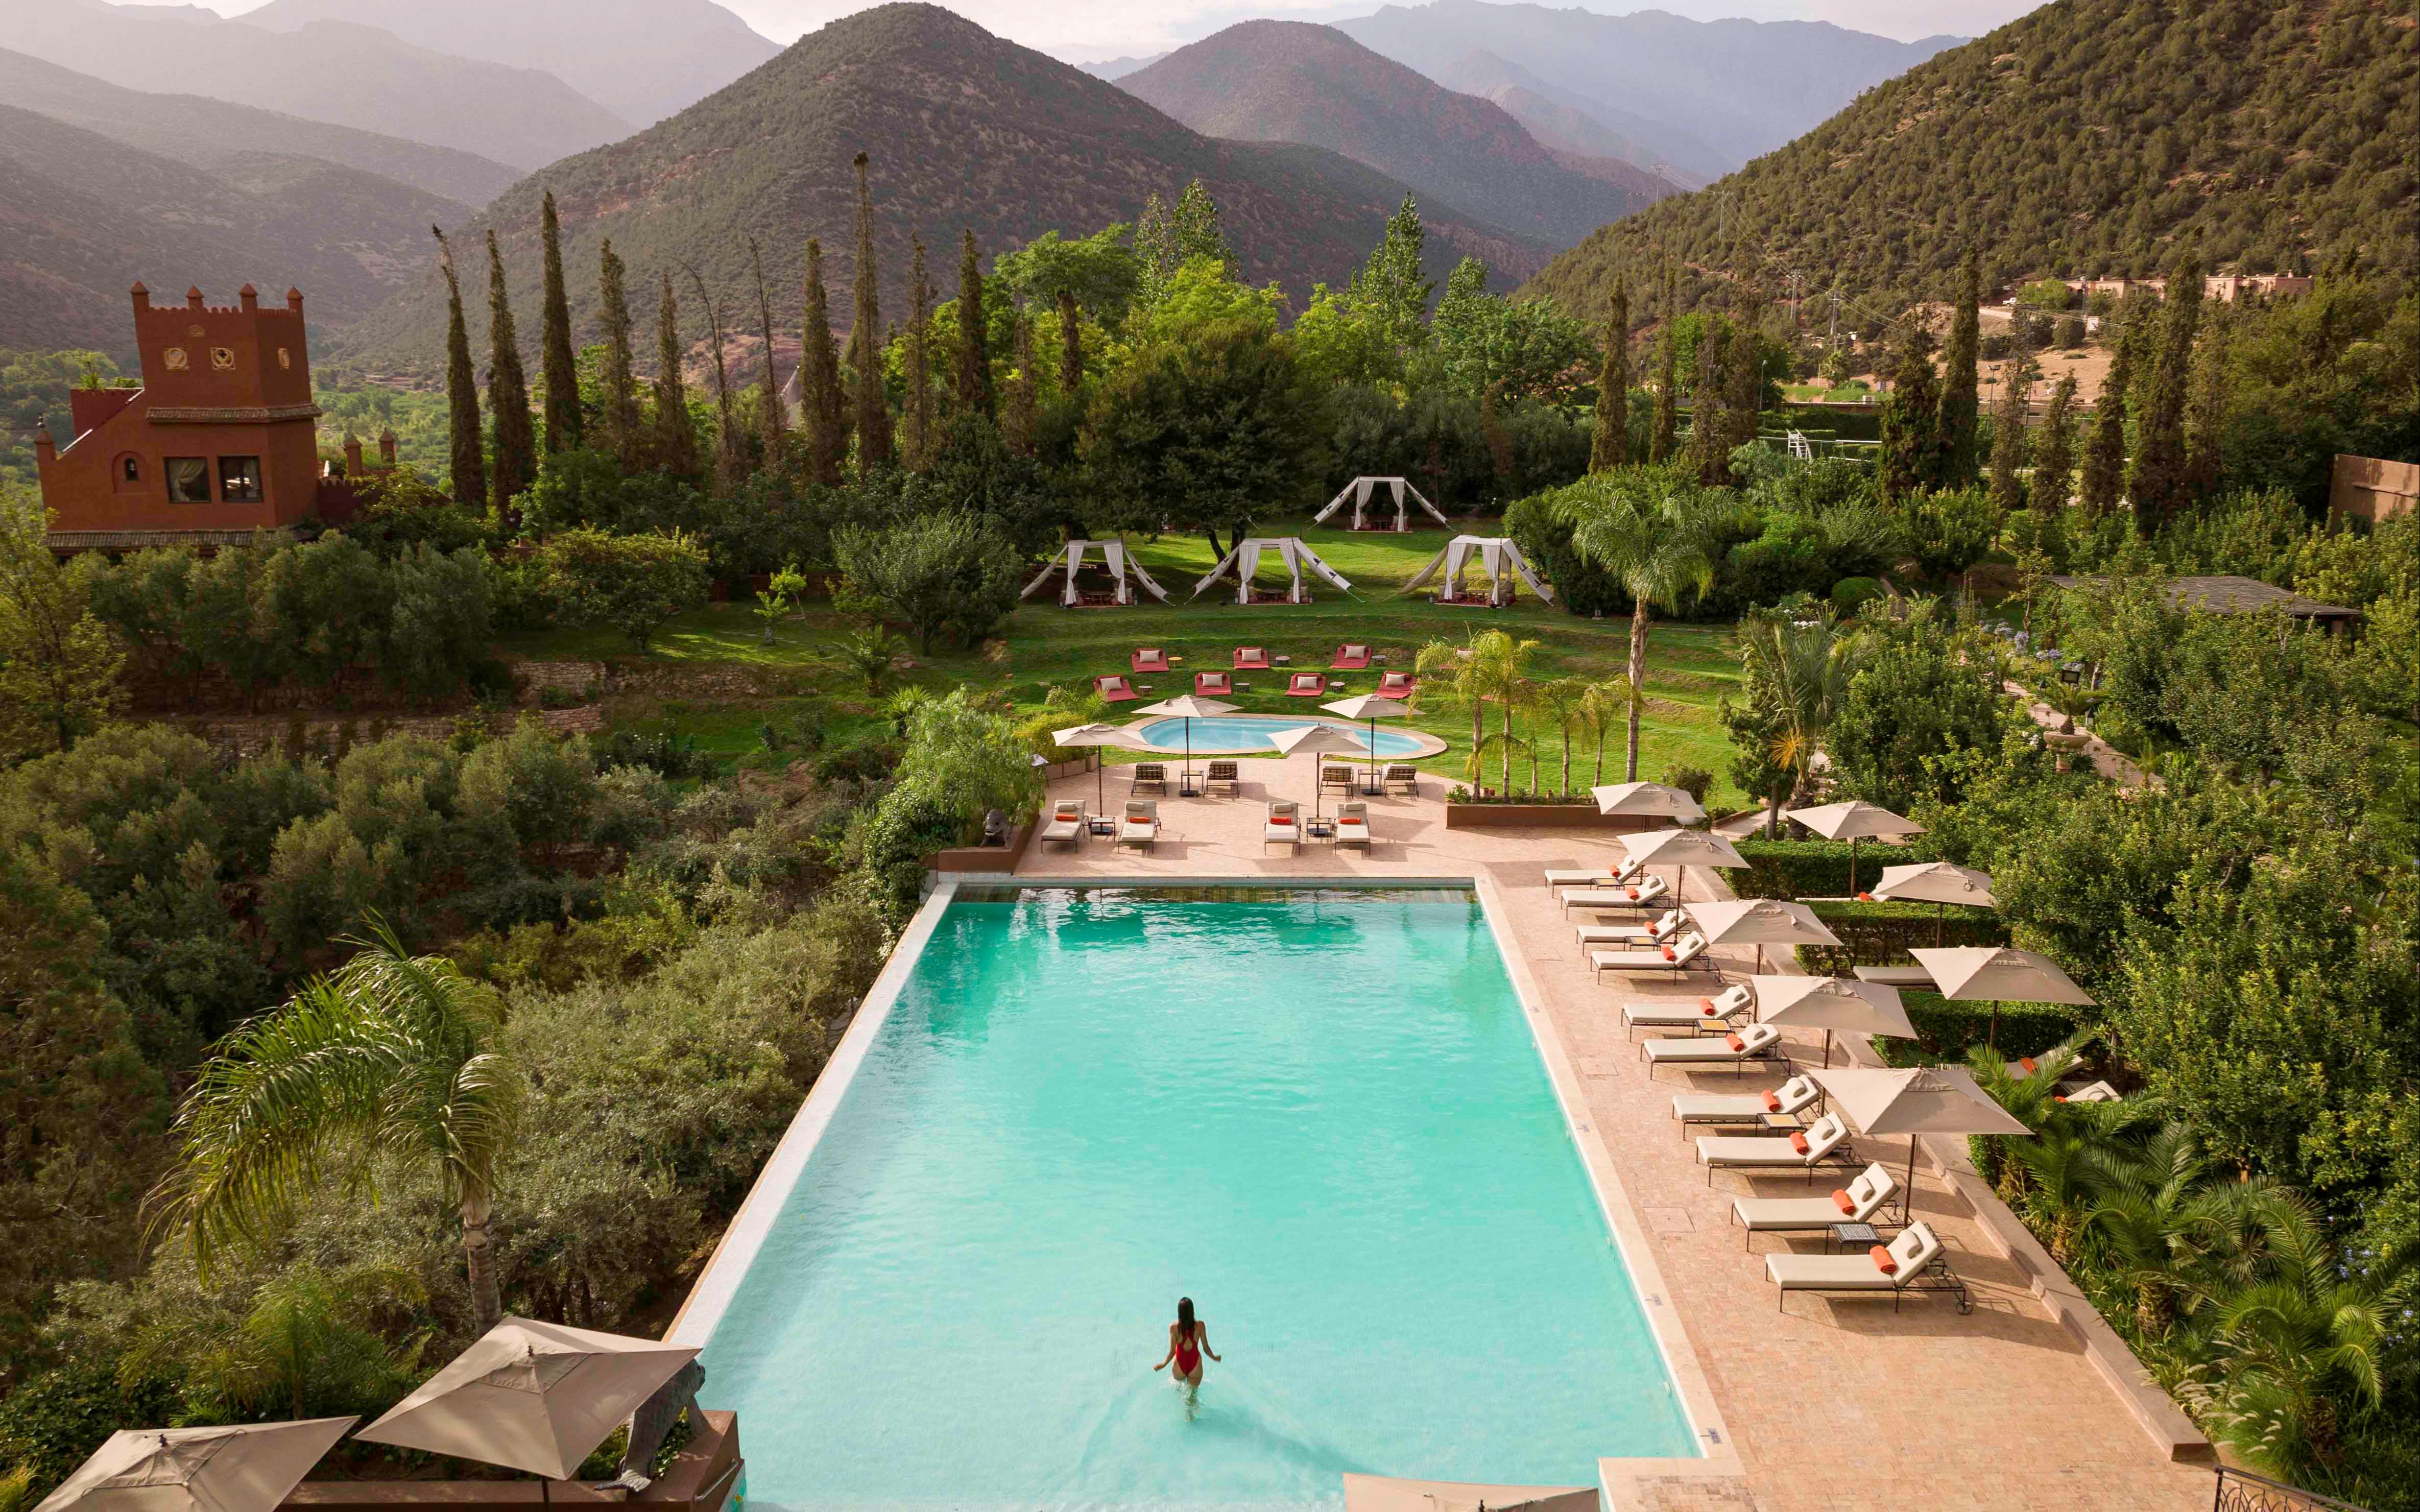 An image of the outdoor pool in Virgin Limited Edition's Kasbah Tamadot property